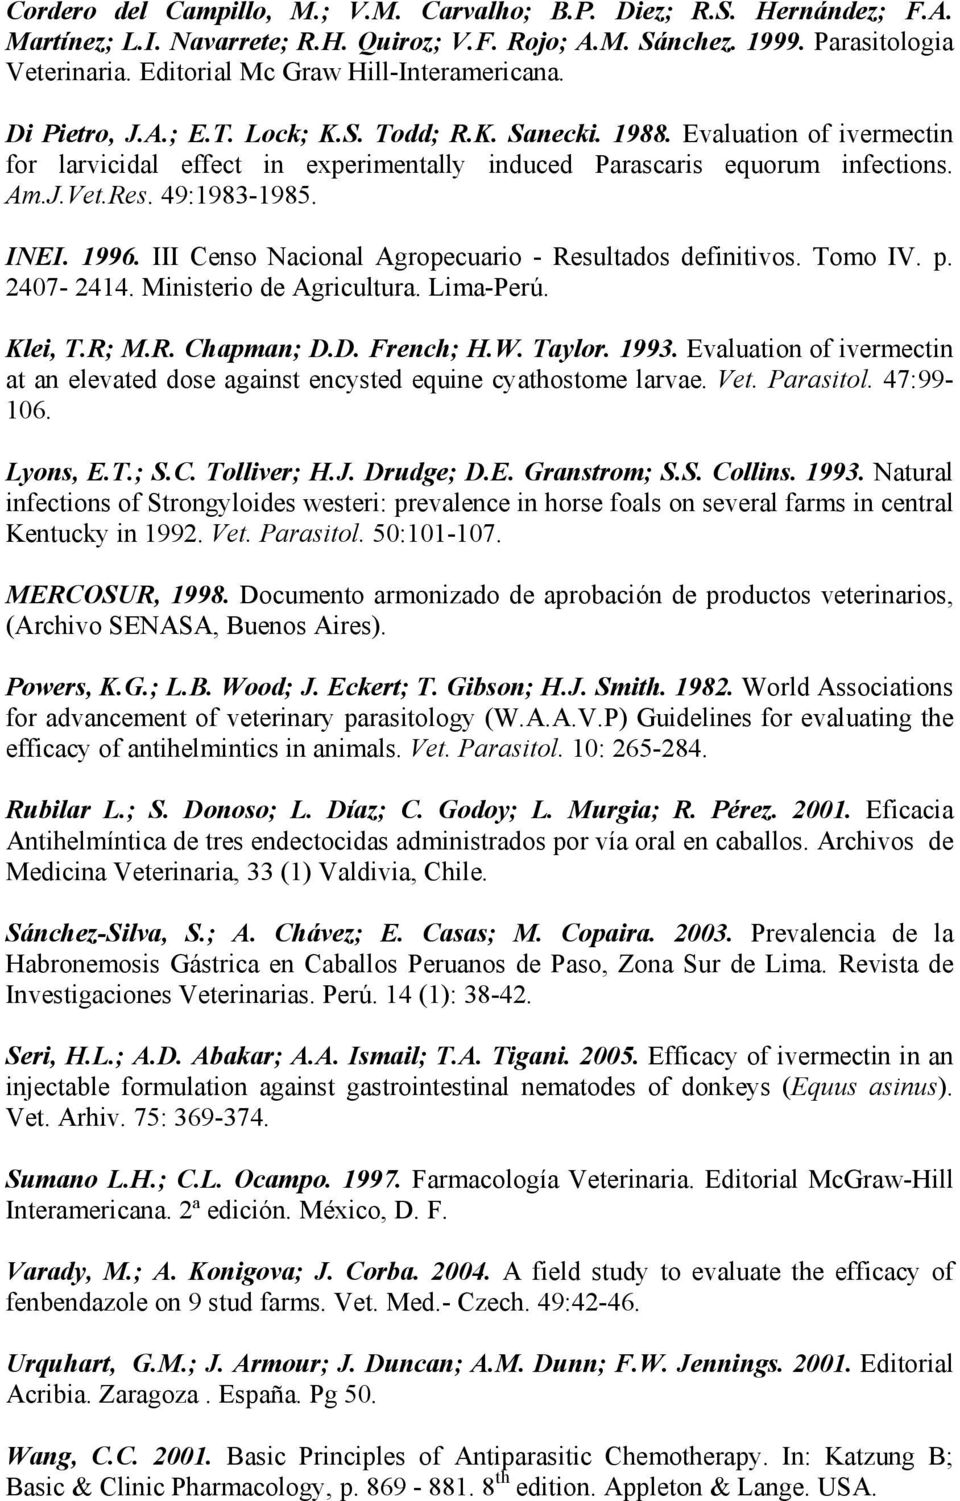 Evaluation of ivermectin for larvicidal effect in experimentally induced Parascaris equorum infections. Am.J.Vet.Res. 49:1983-1985. INEI. 1996.